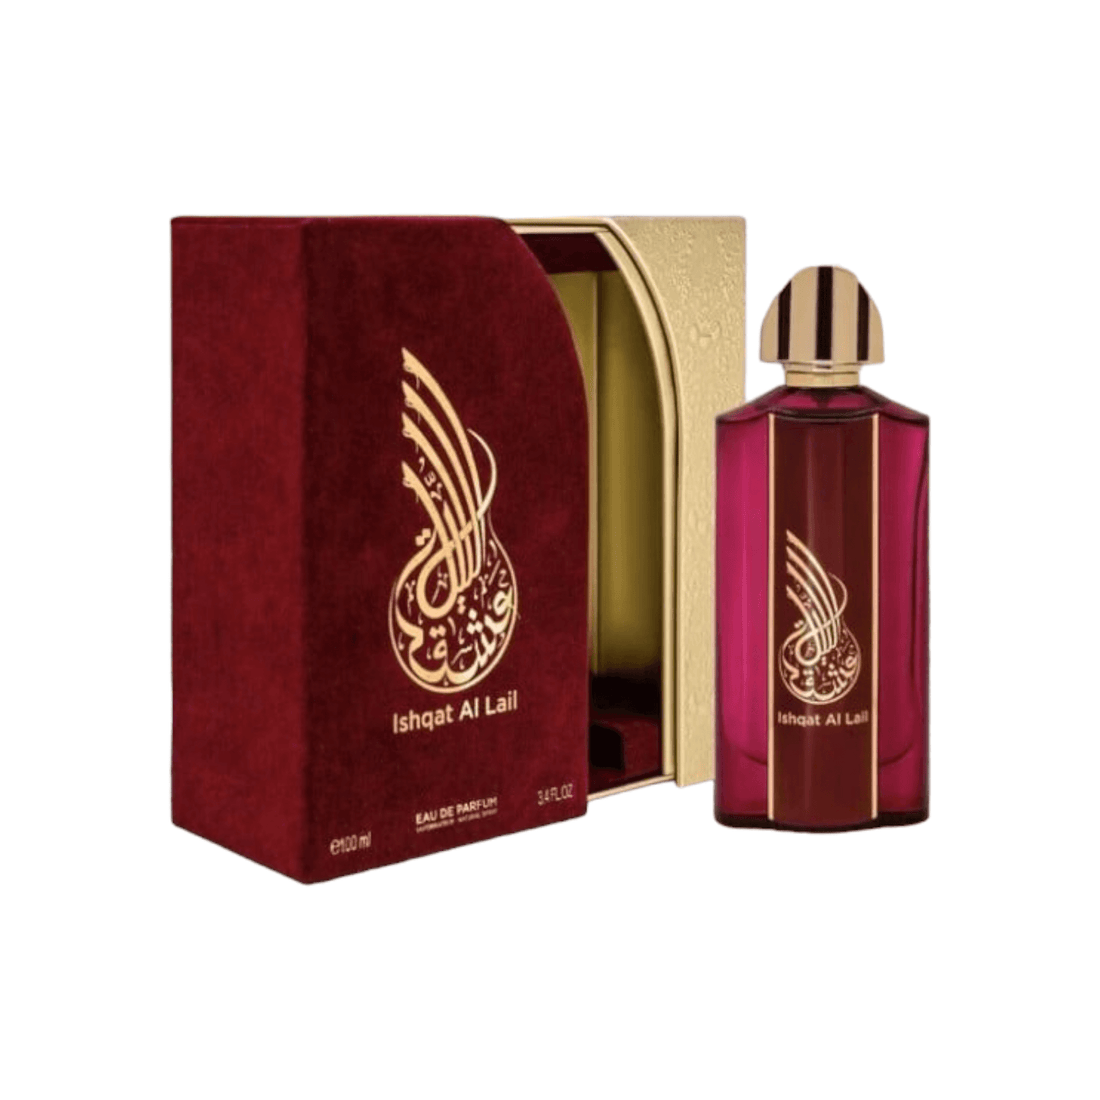 Luxurious bottle of Fragrance World Athoor Al Alam Ishqat Al Lail, showcasing its unique blend of poppy and almond.